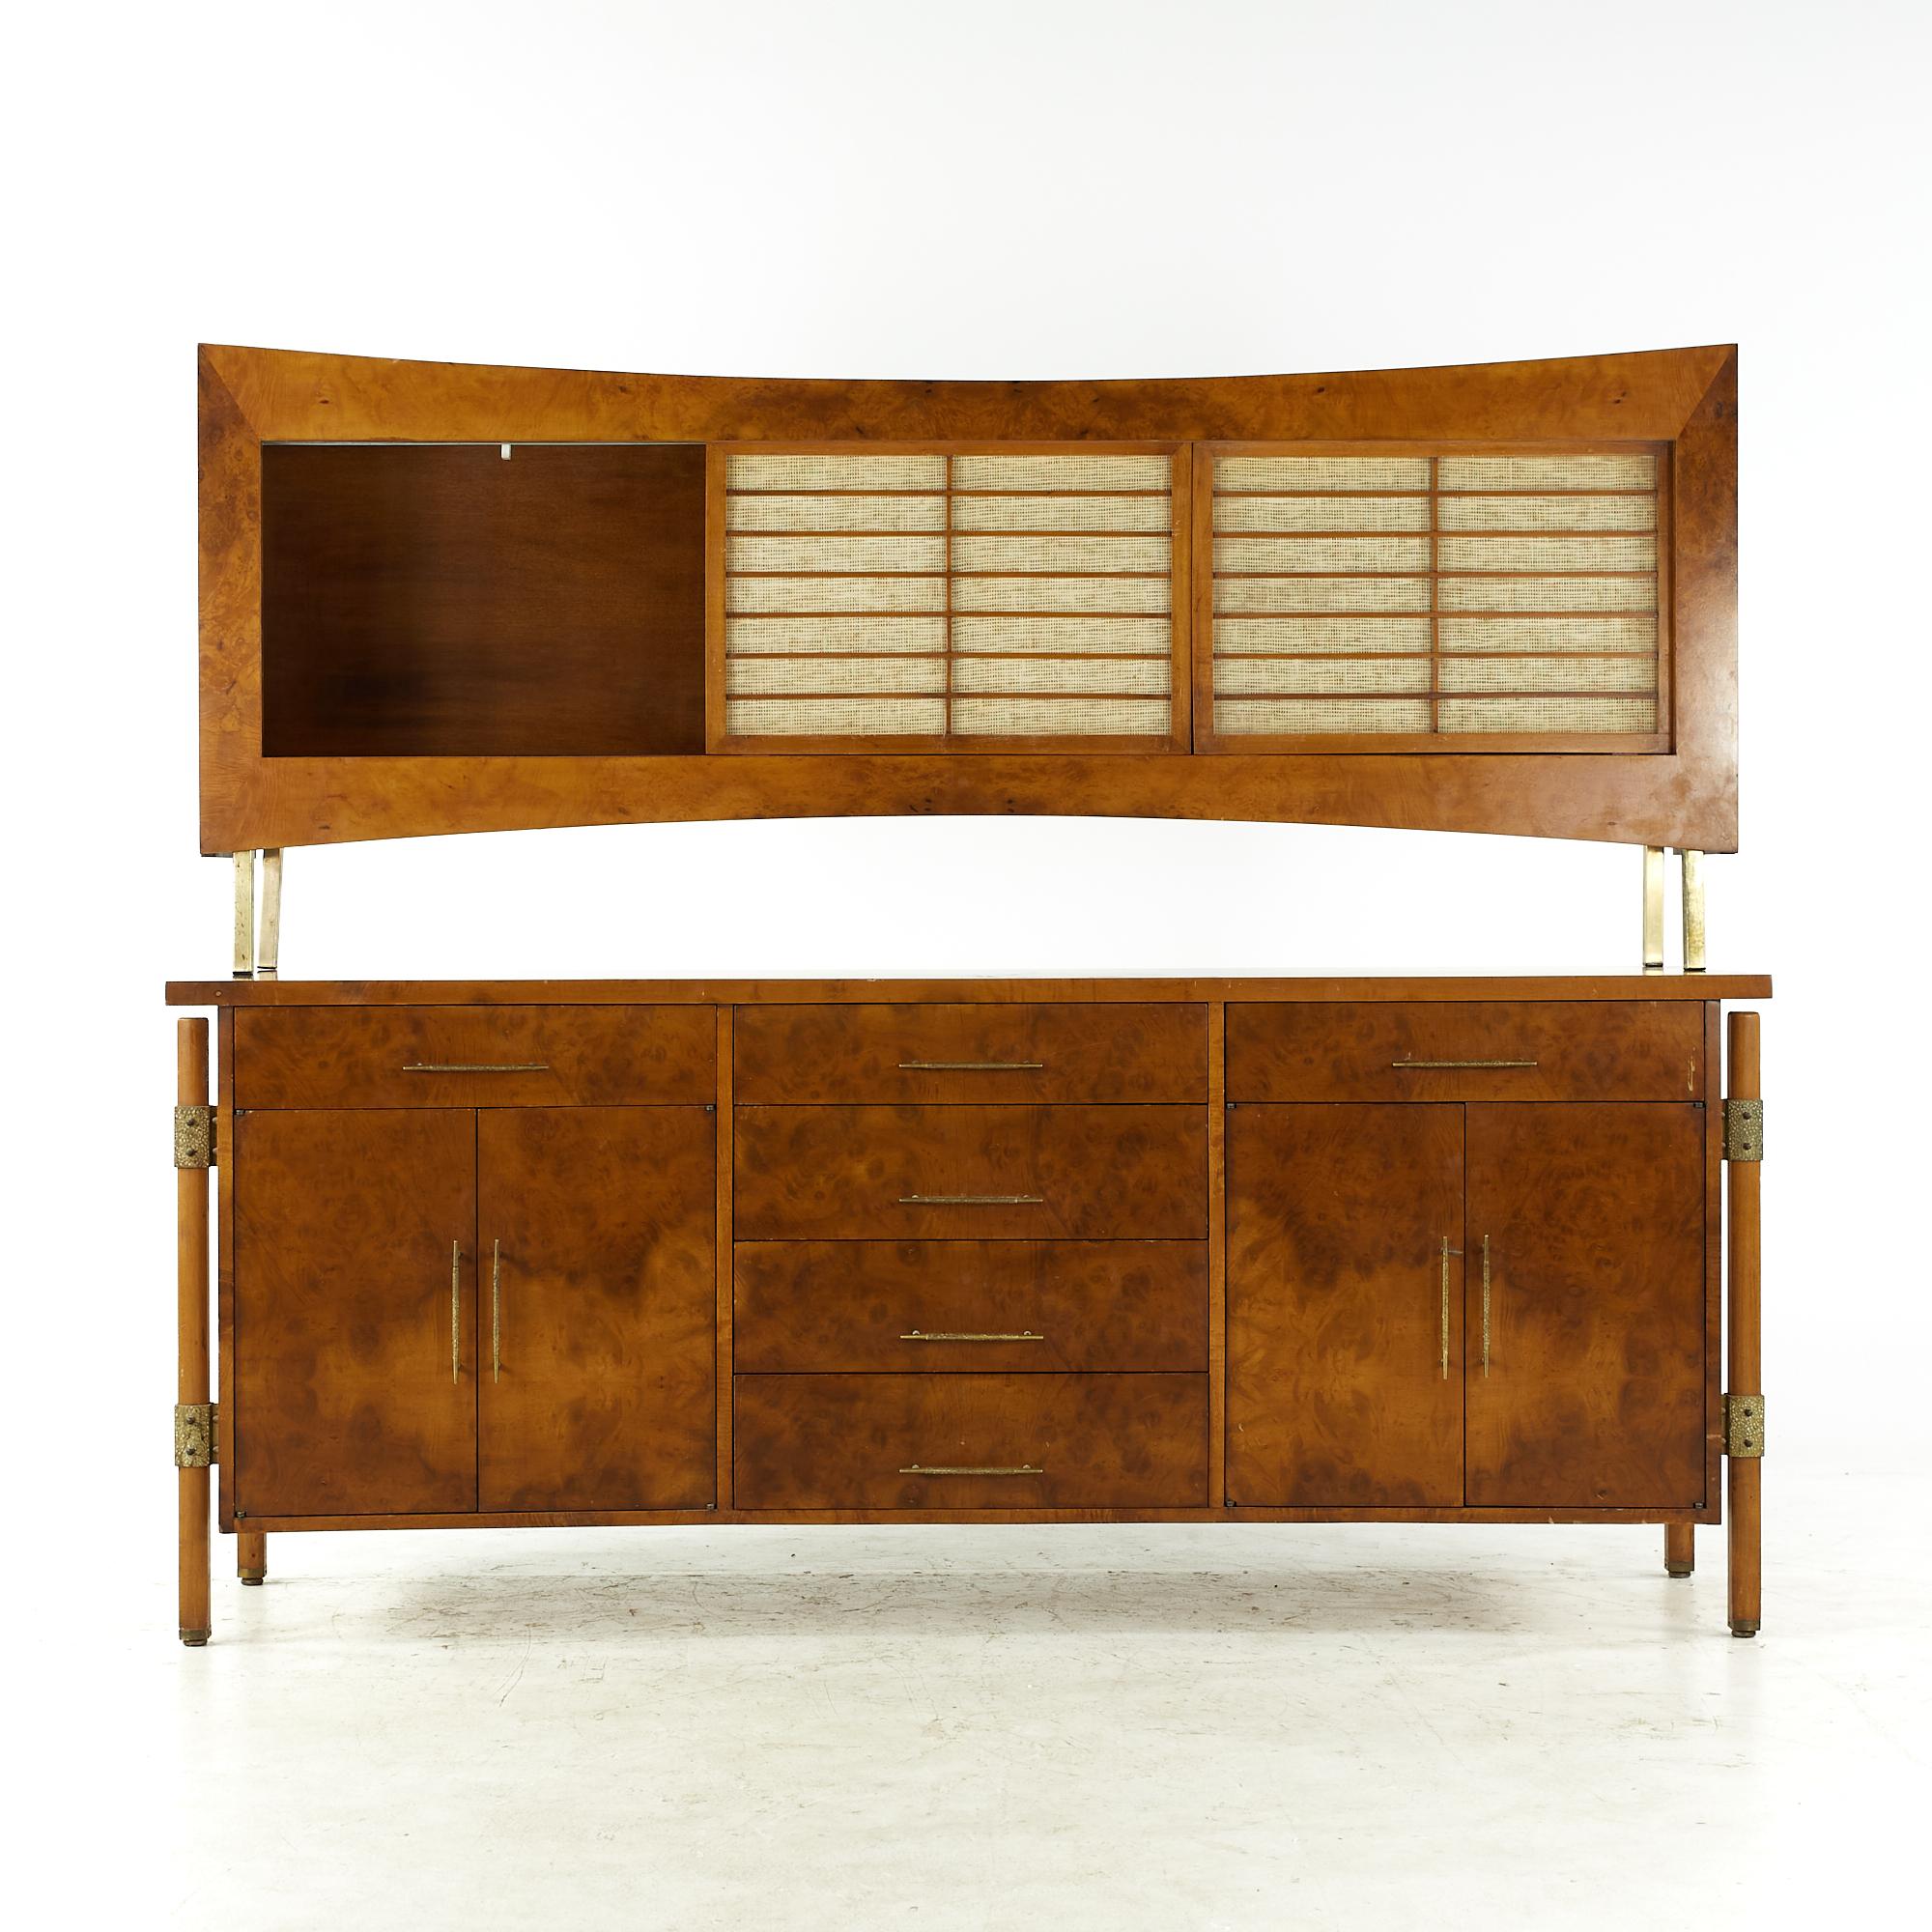 Harold Schwartz for Romweber midcentury Burlwood and Brass Buffet and Hutch

The buffet measures: 78.25 wide x 24 deep x 33 inches high
The hutch measures: 78 wide x 14 deep x 31.75 inches high
The combined height of the buffet and hutch is